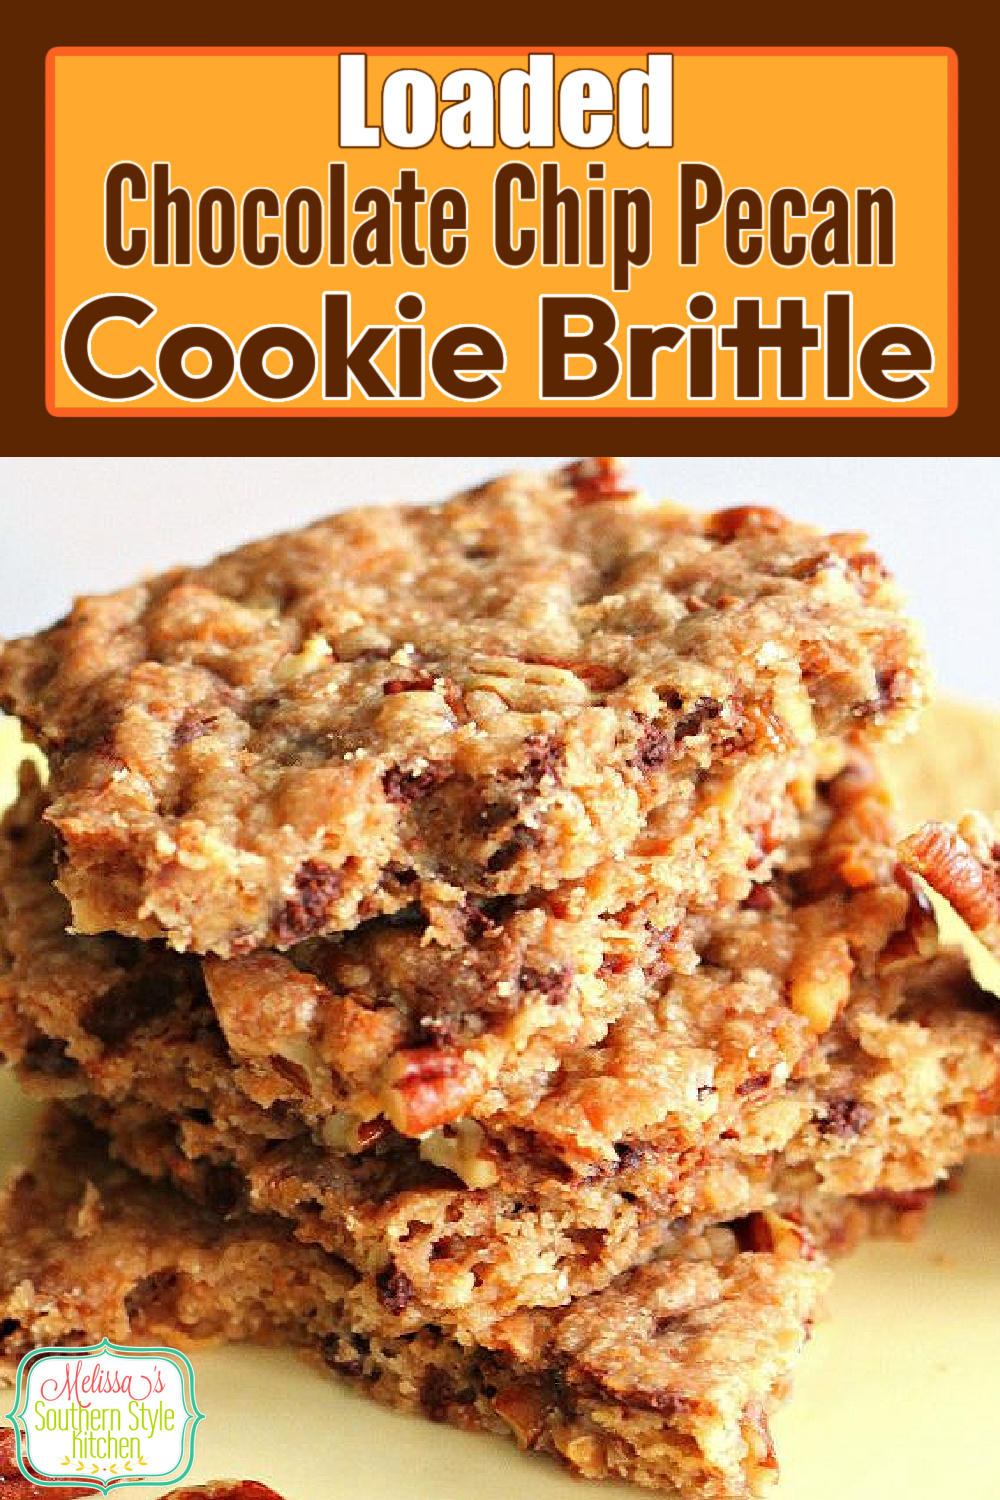 Loaded Chocolate Chip Pecan Cookie Brittle is easy to make and eat #cookiebrittle #chocolatechipscookies #pecancookies #desserts #holidaybaking #christmascookies #dessertfoodrecipes #southernfood #southernrecipes via @melissasssk